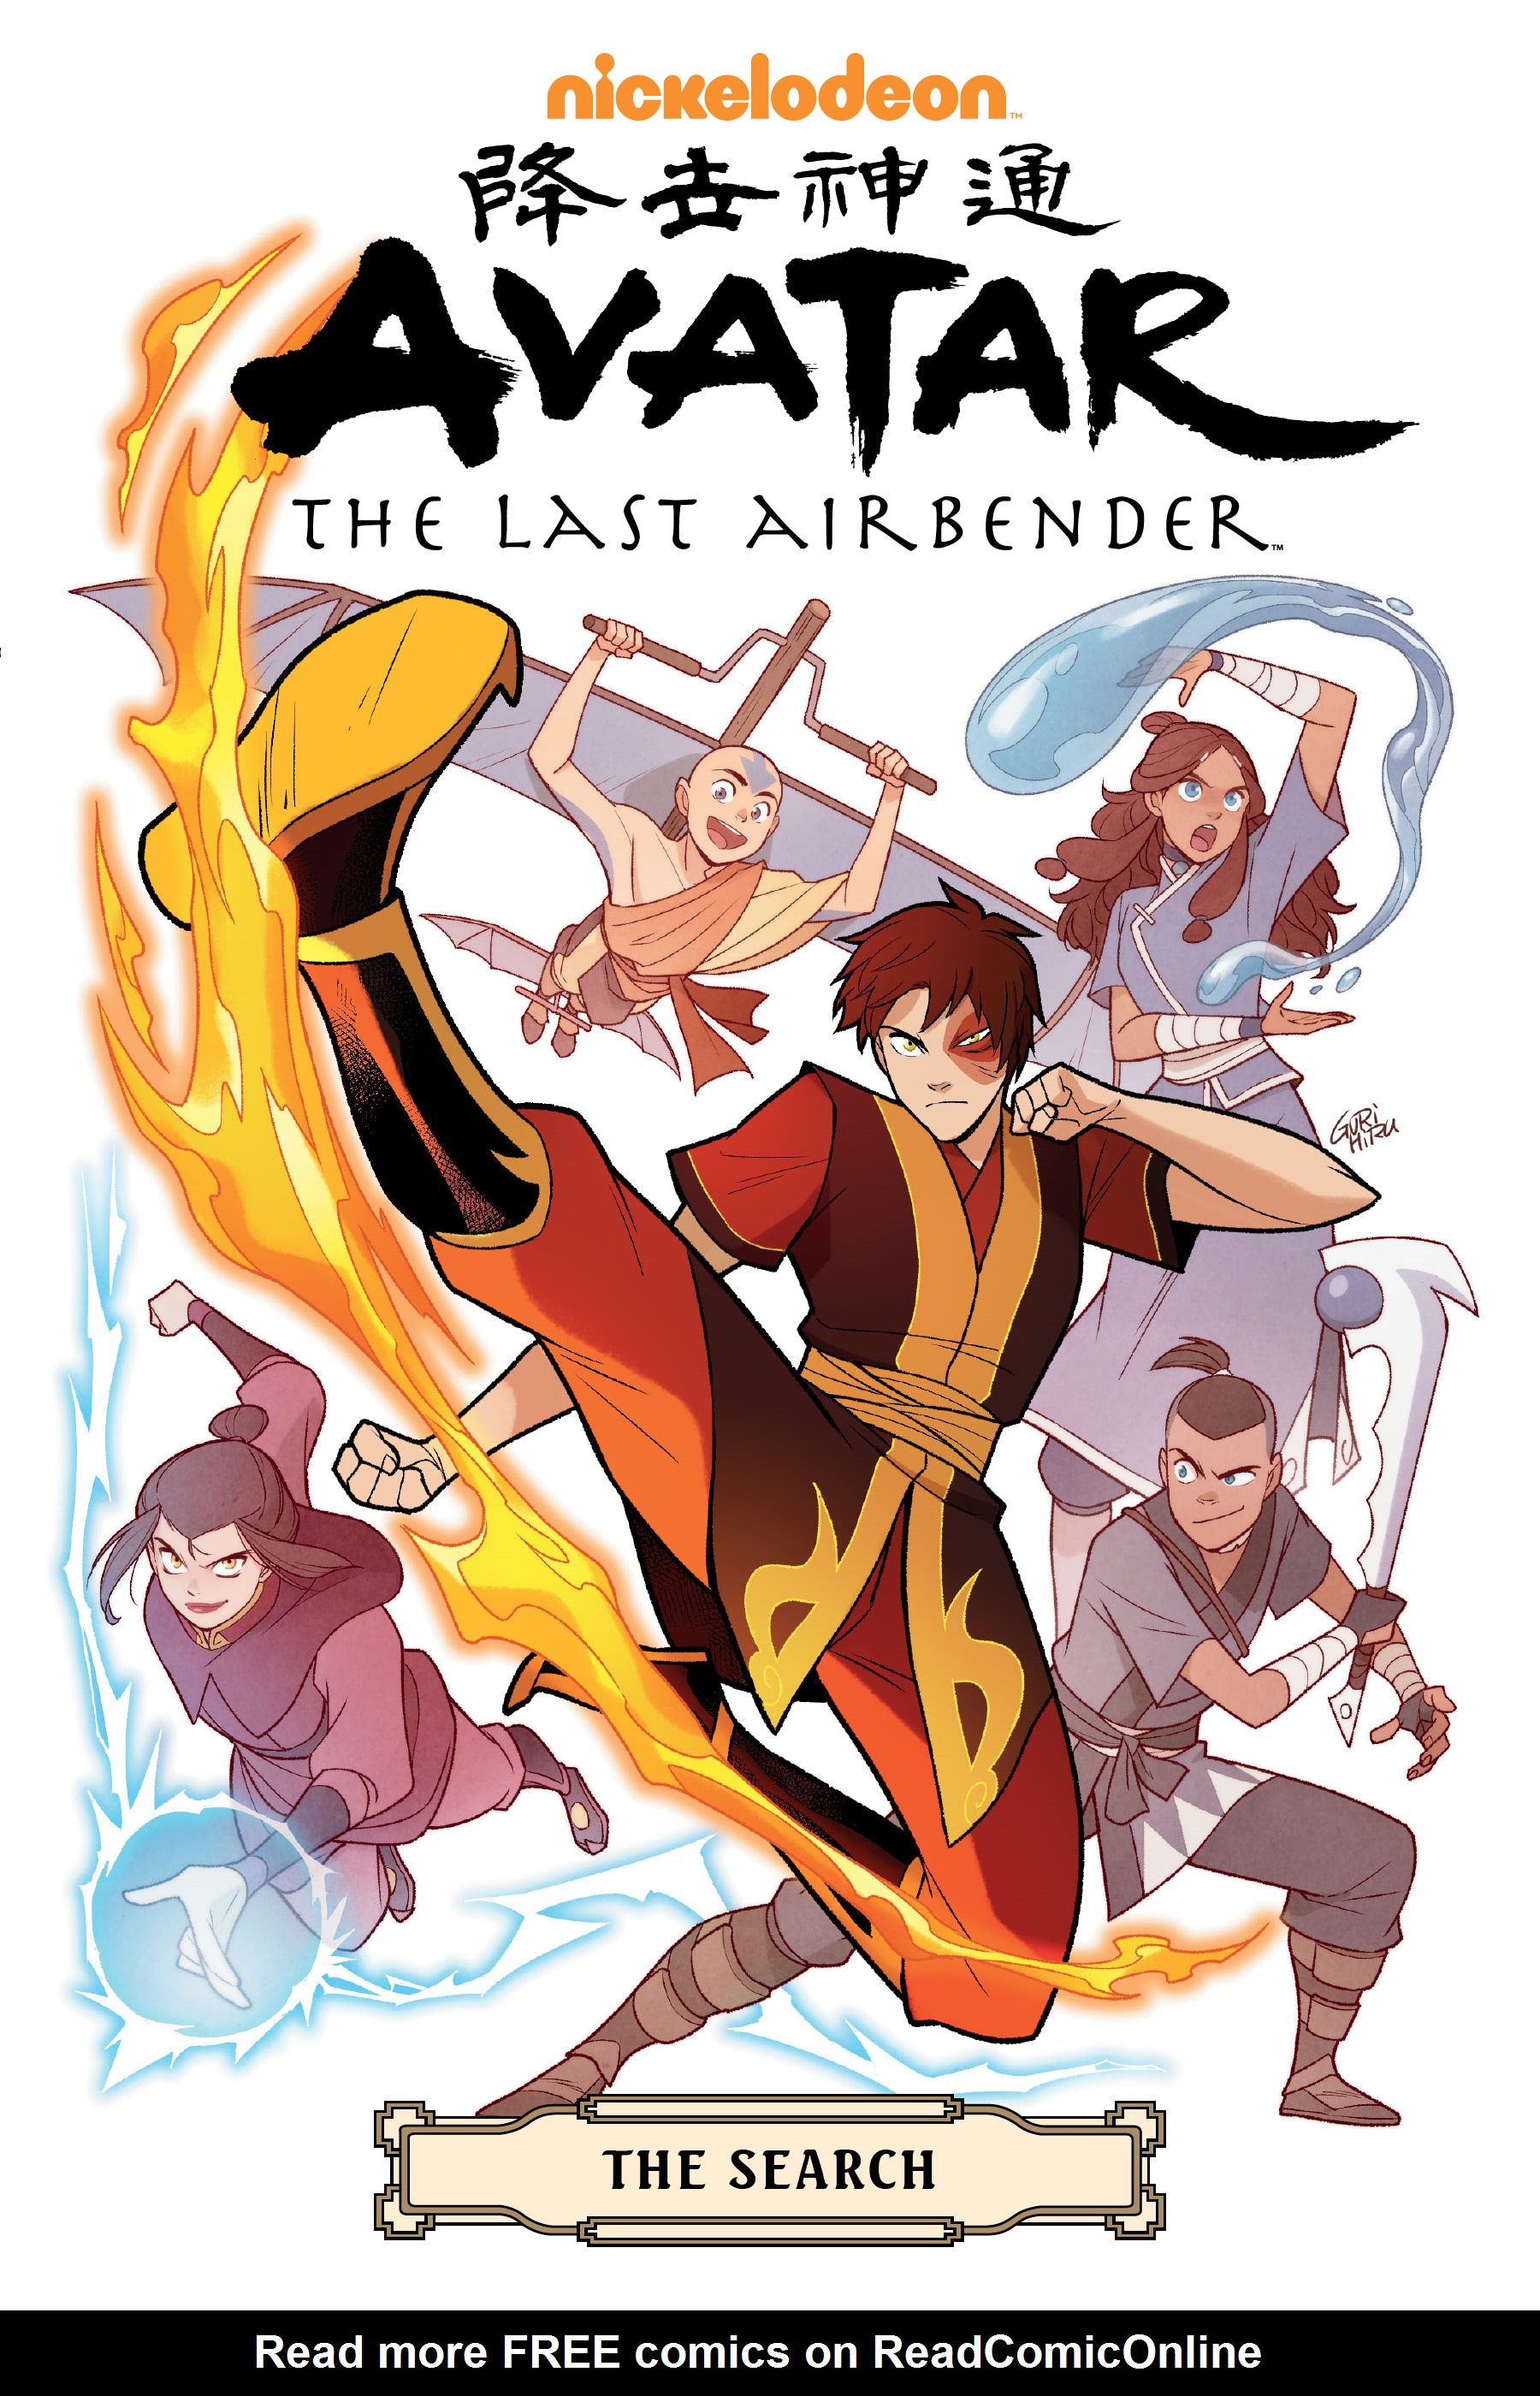 Read online Nickelodeon Avatar: The Last Airbender - The Search comic -  Issue # _TPB Omnibus (Part 1) - 1